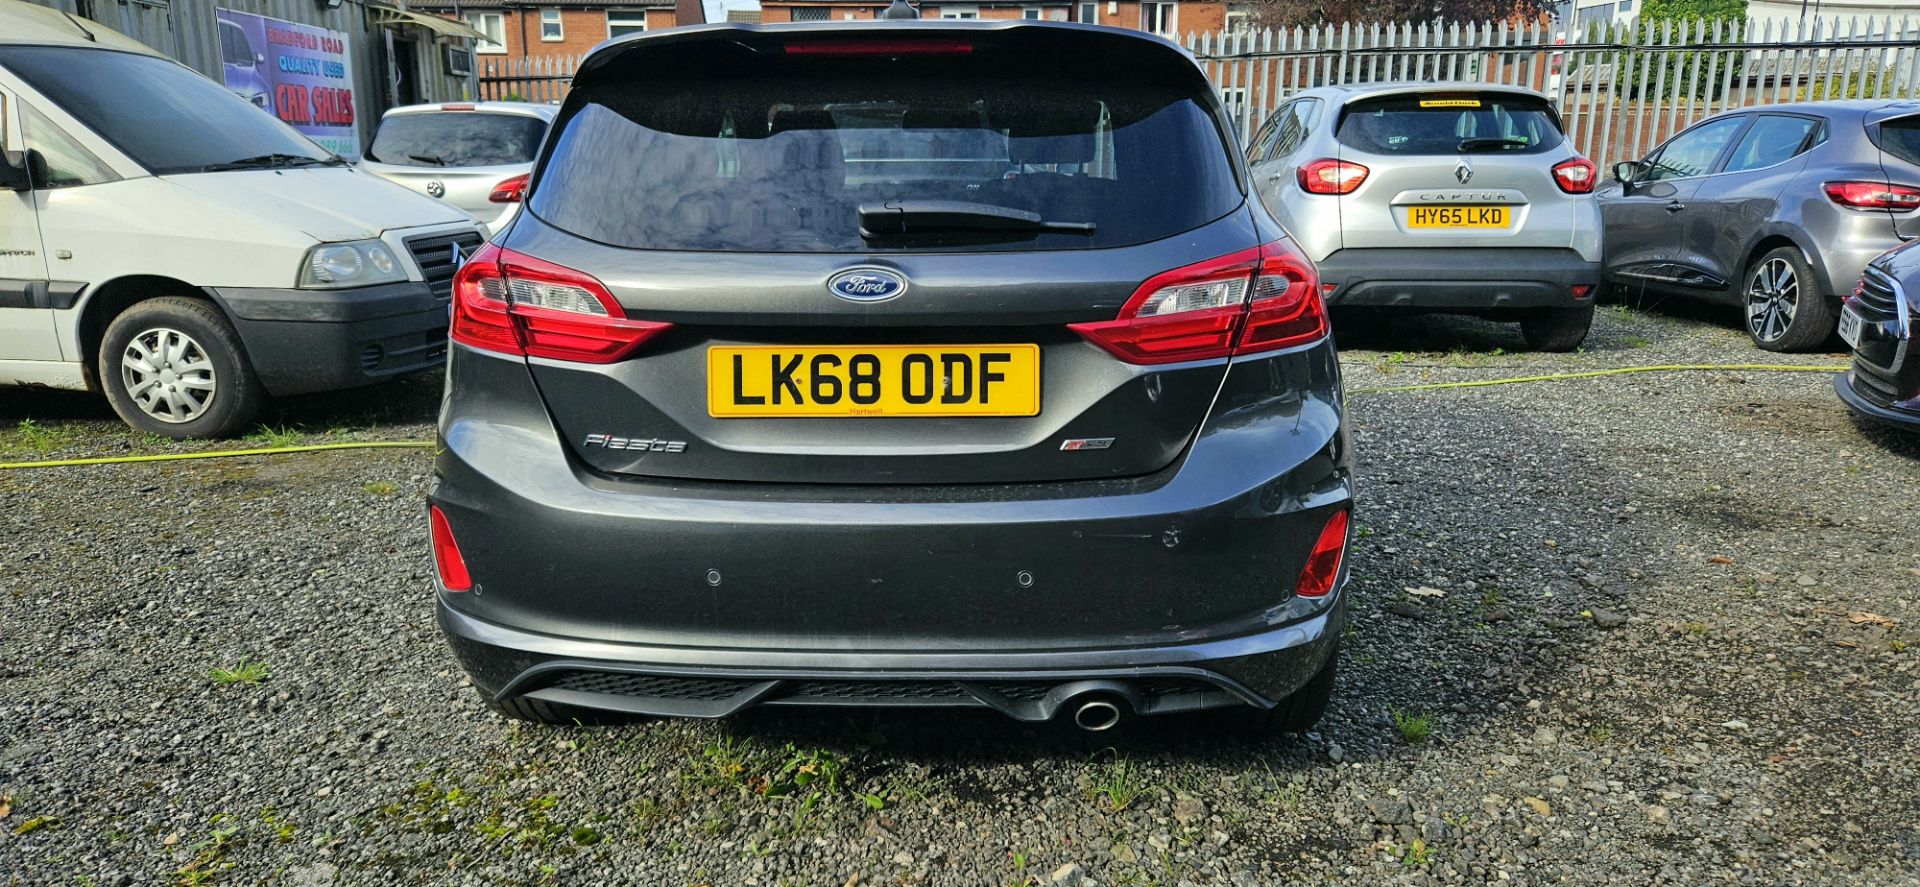 2019 FORD FIESTA ST LINE 1 LITRE AUTOMATIC - Image 2 of 8